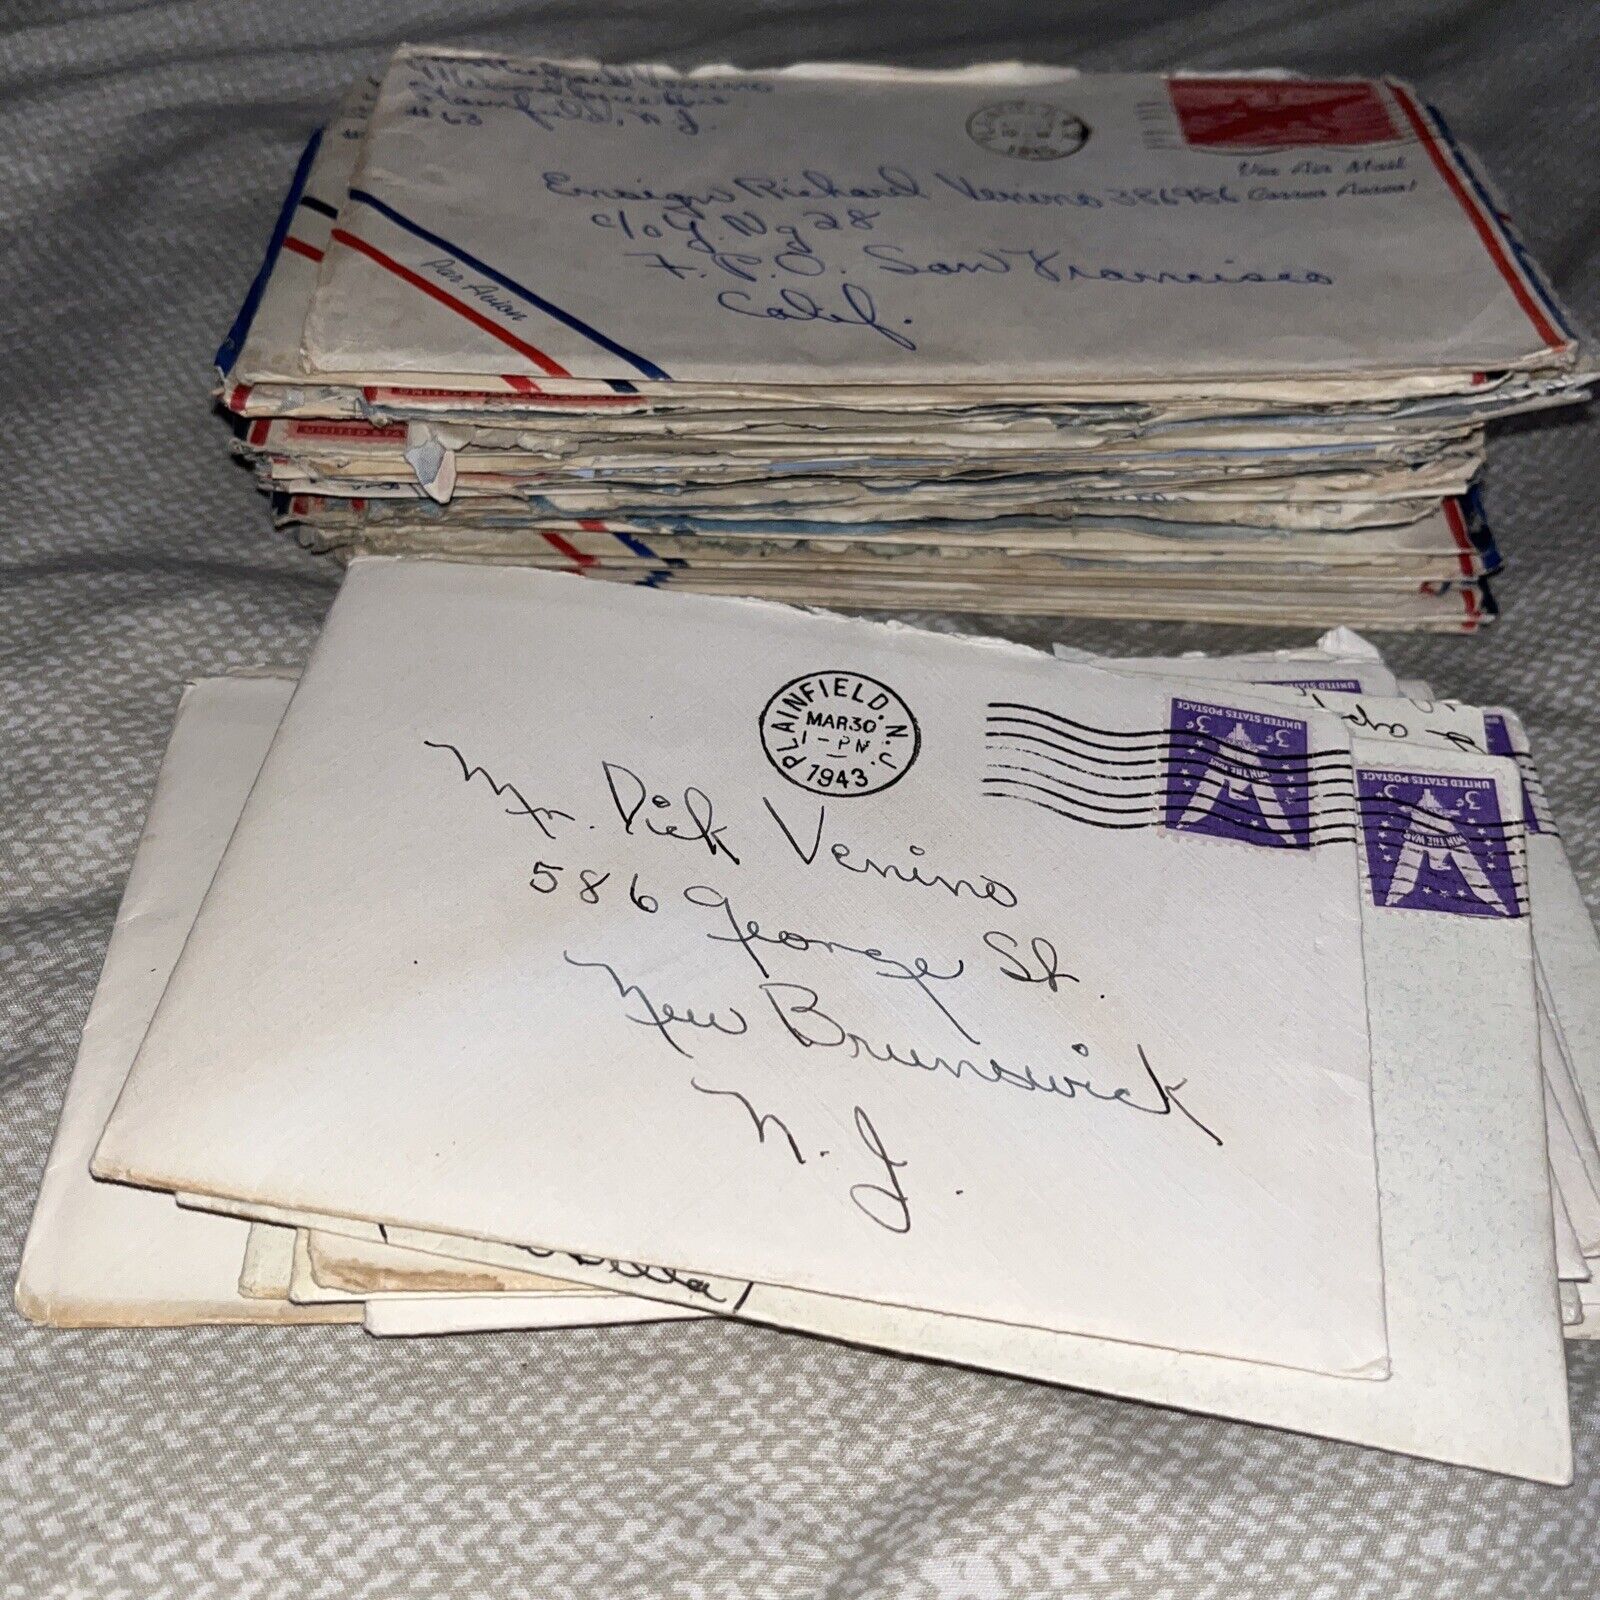 21 WWII 1945 Love Letters from Wife to Navy Ensign + 9 from 1942-3 Lipstick Kiss